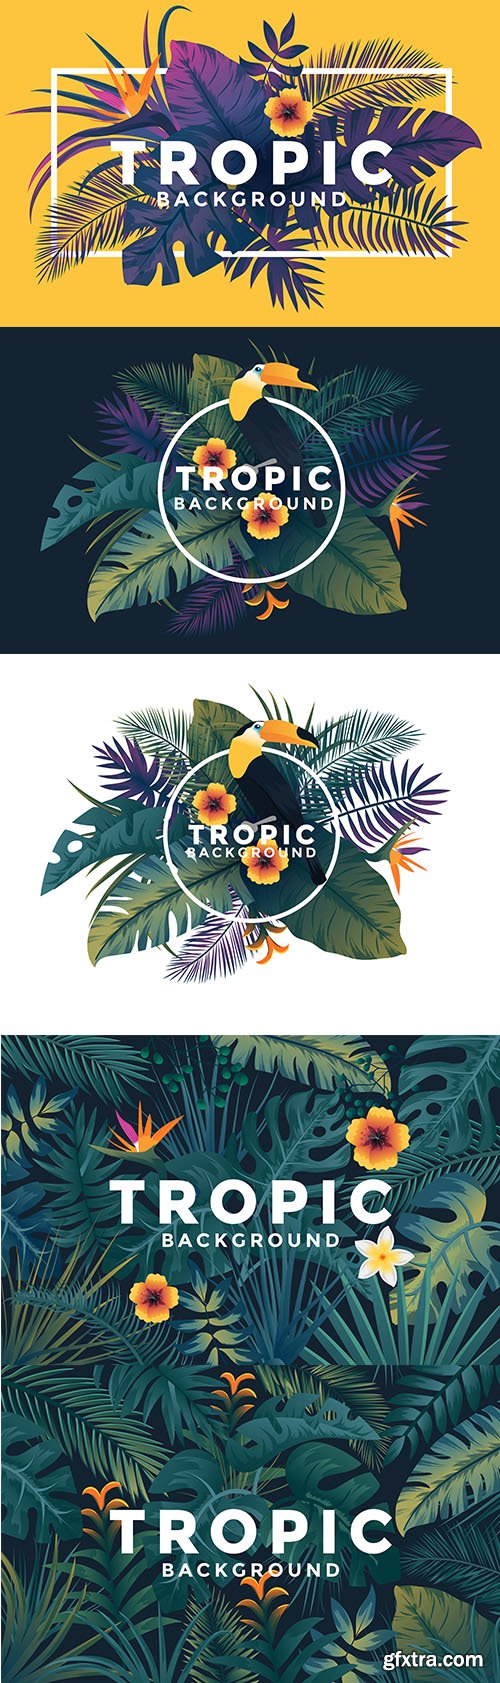 Tropical Backgrounds